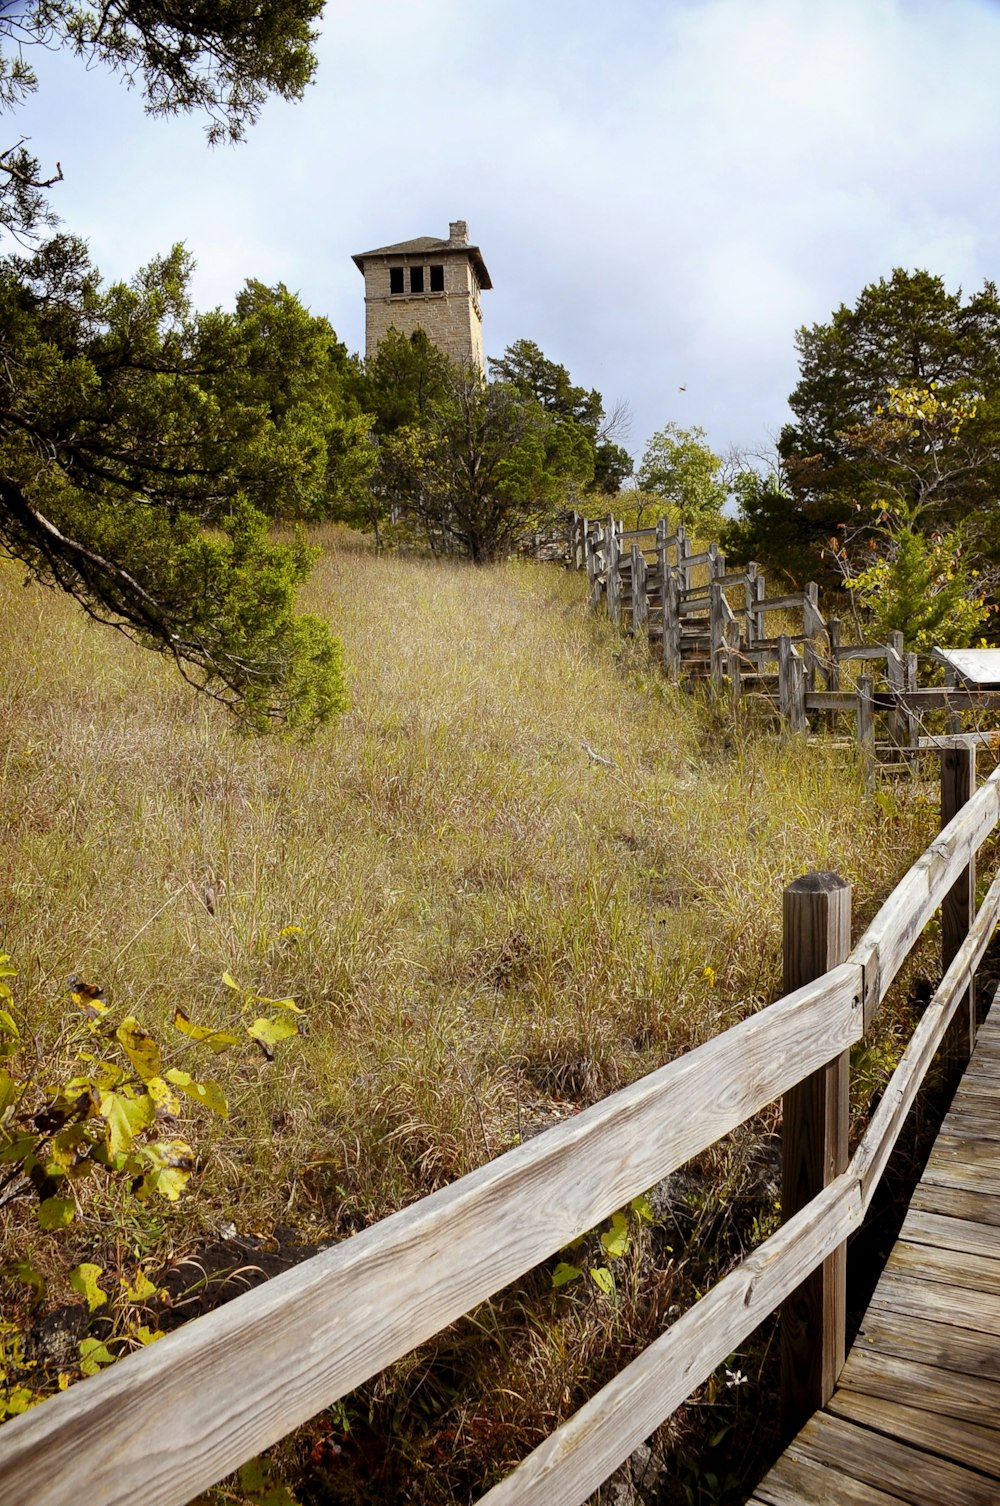 a wooden walkway leading to a tower on a hill